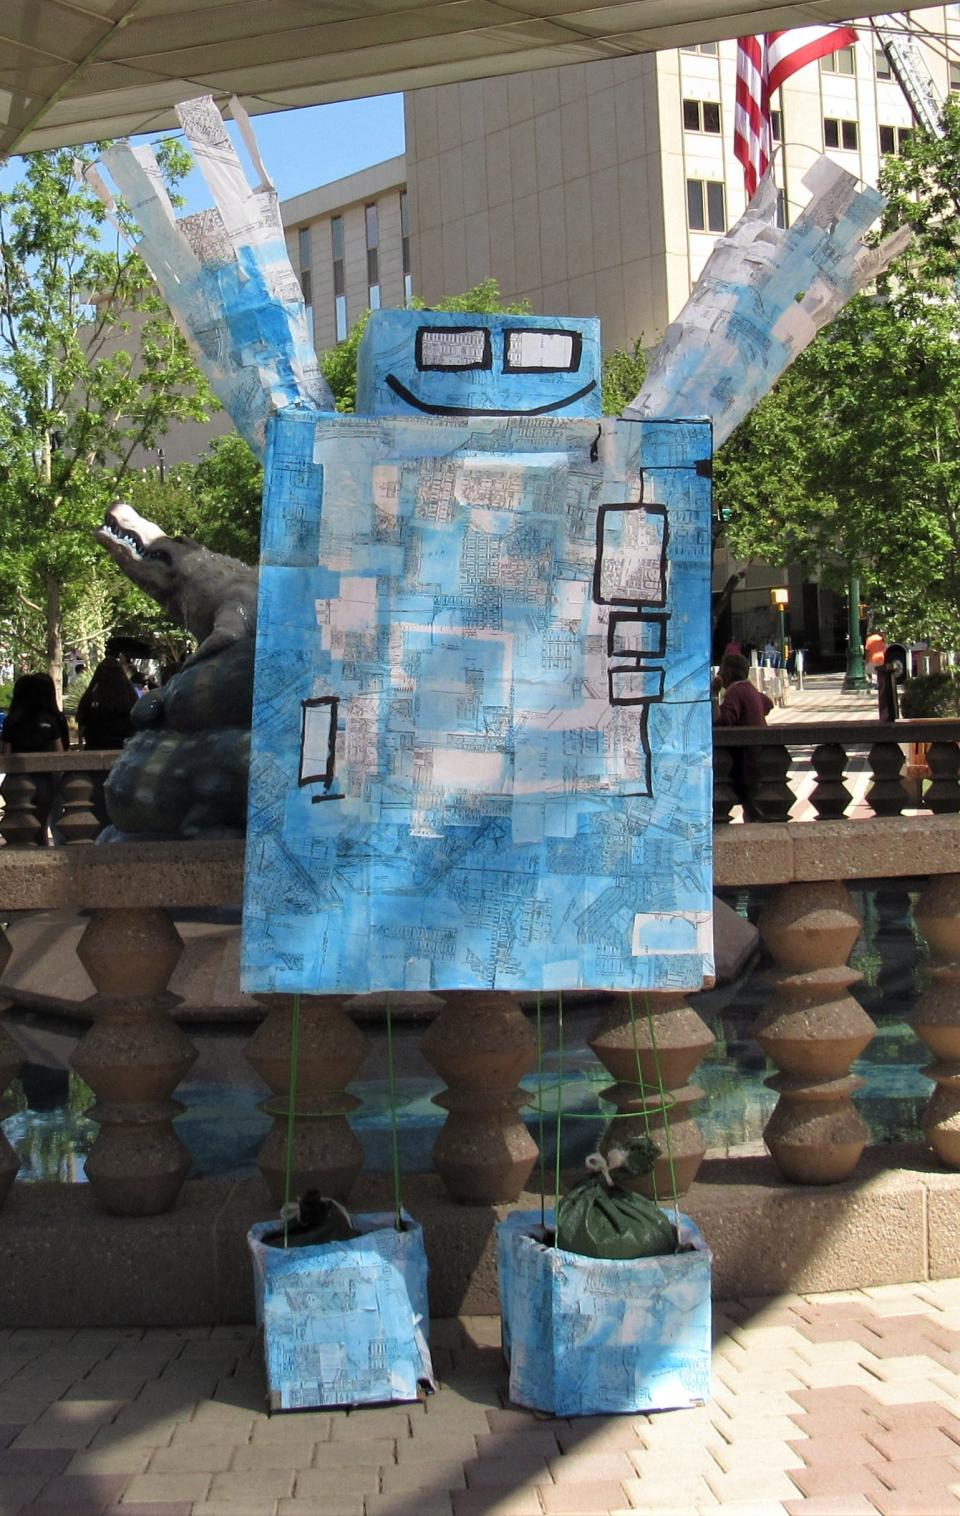 Artworks made from recycled products were on display as the city of El Paso's Environmental Services Department held an Earth Day celebration April 20, 2019, at San Jacinto Plaza.